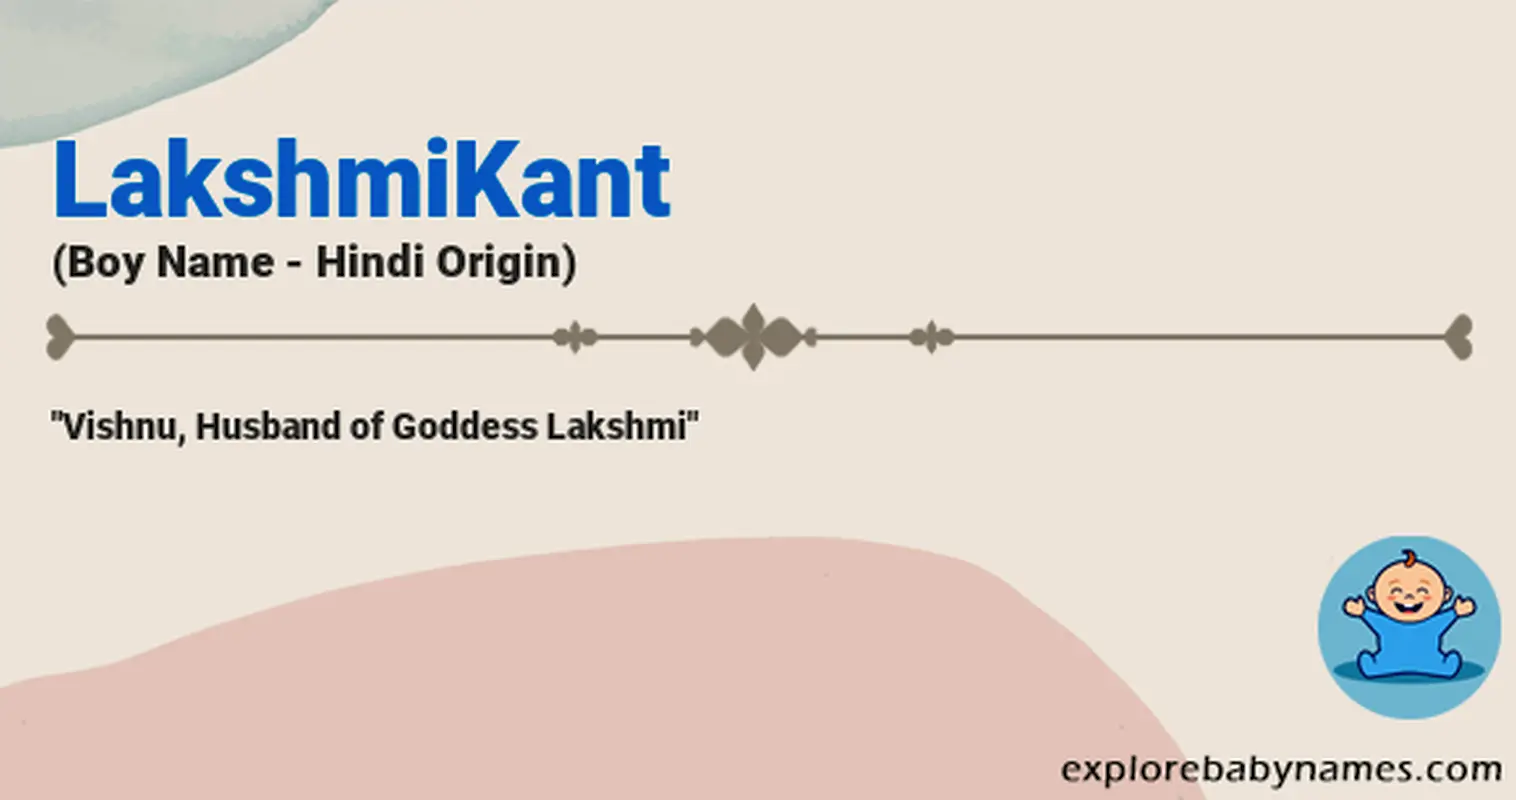 Meaning of LakshmiKant